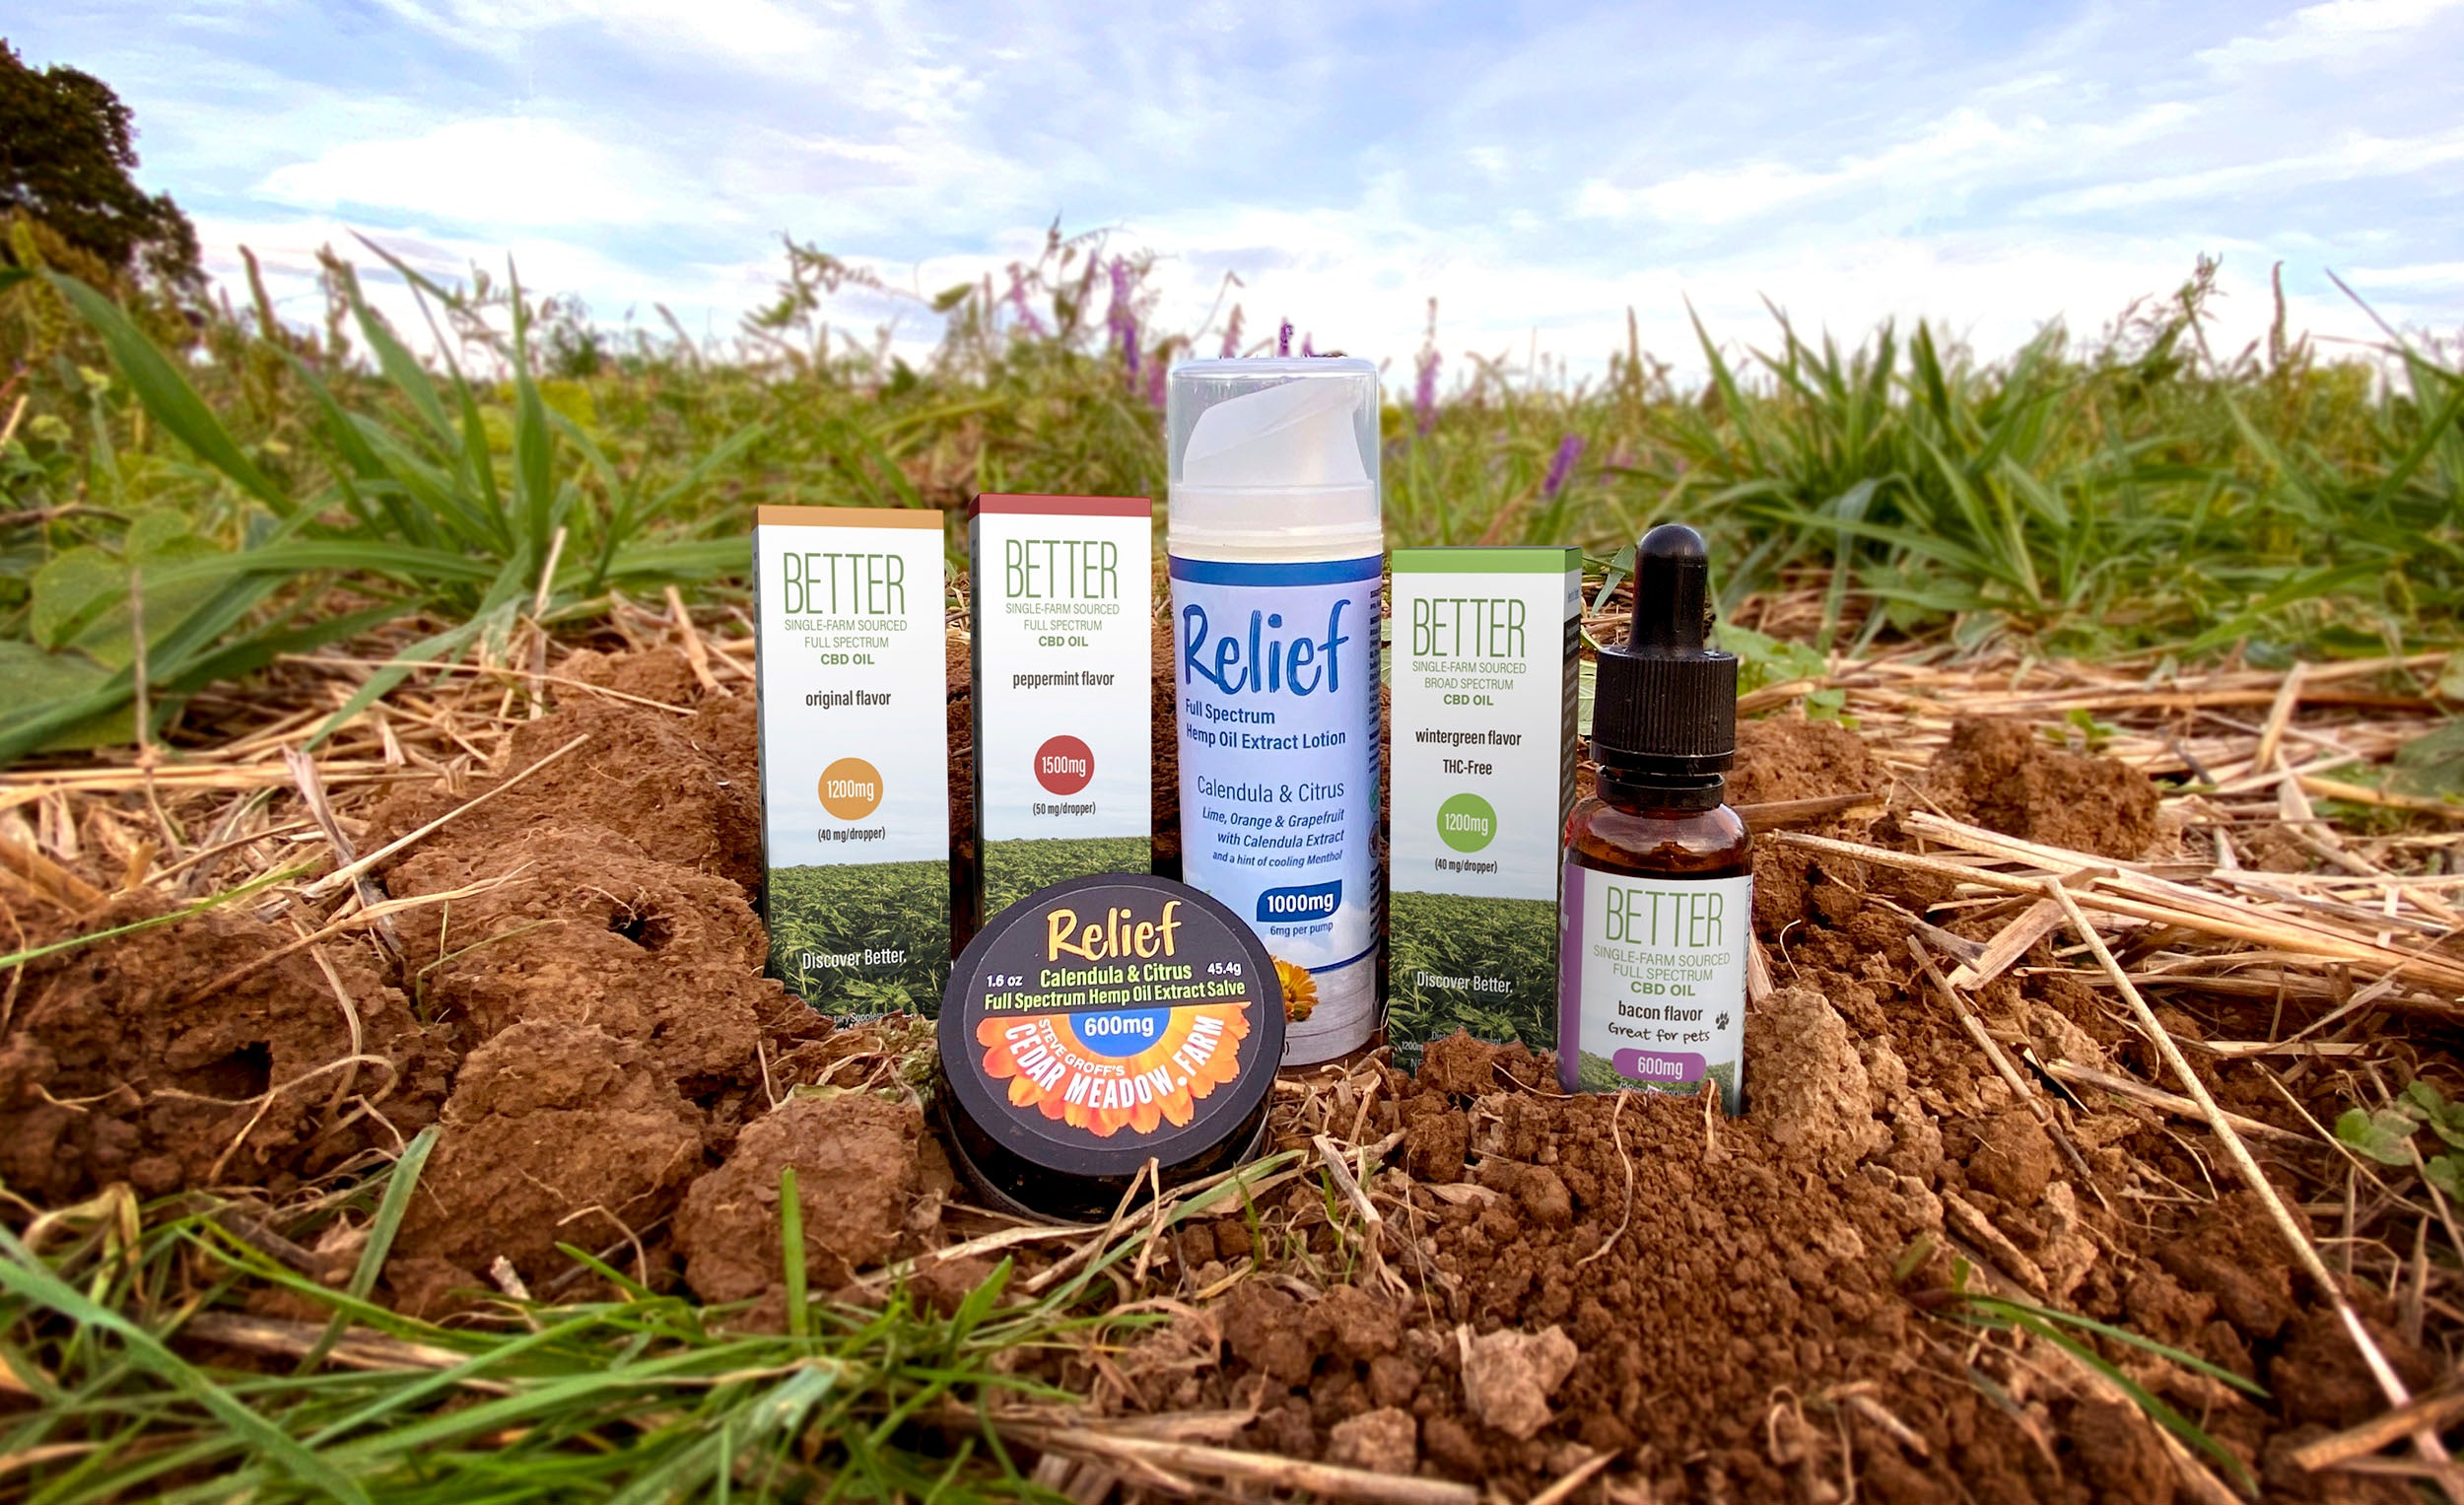 Cedar Meadow Farm CBD oil, lotion and salve in regenerative soil, healthy soil from no-till and cover crop farming methods